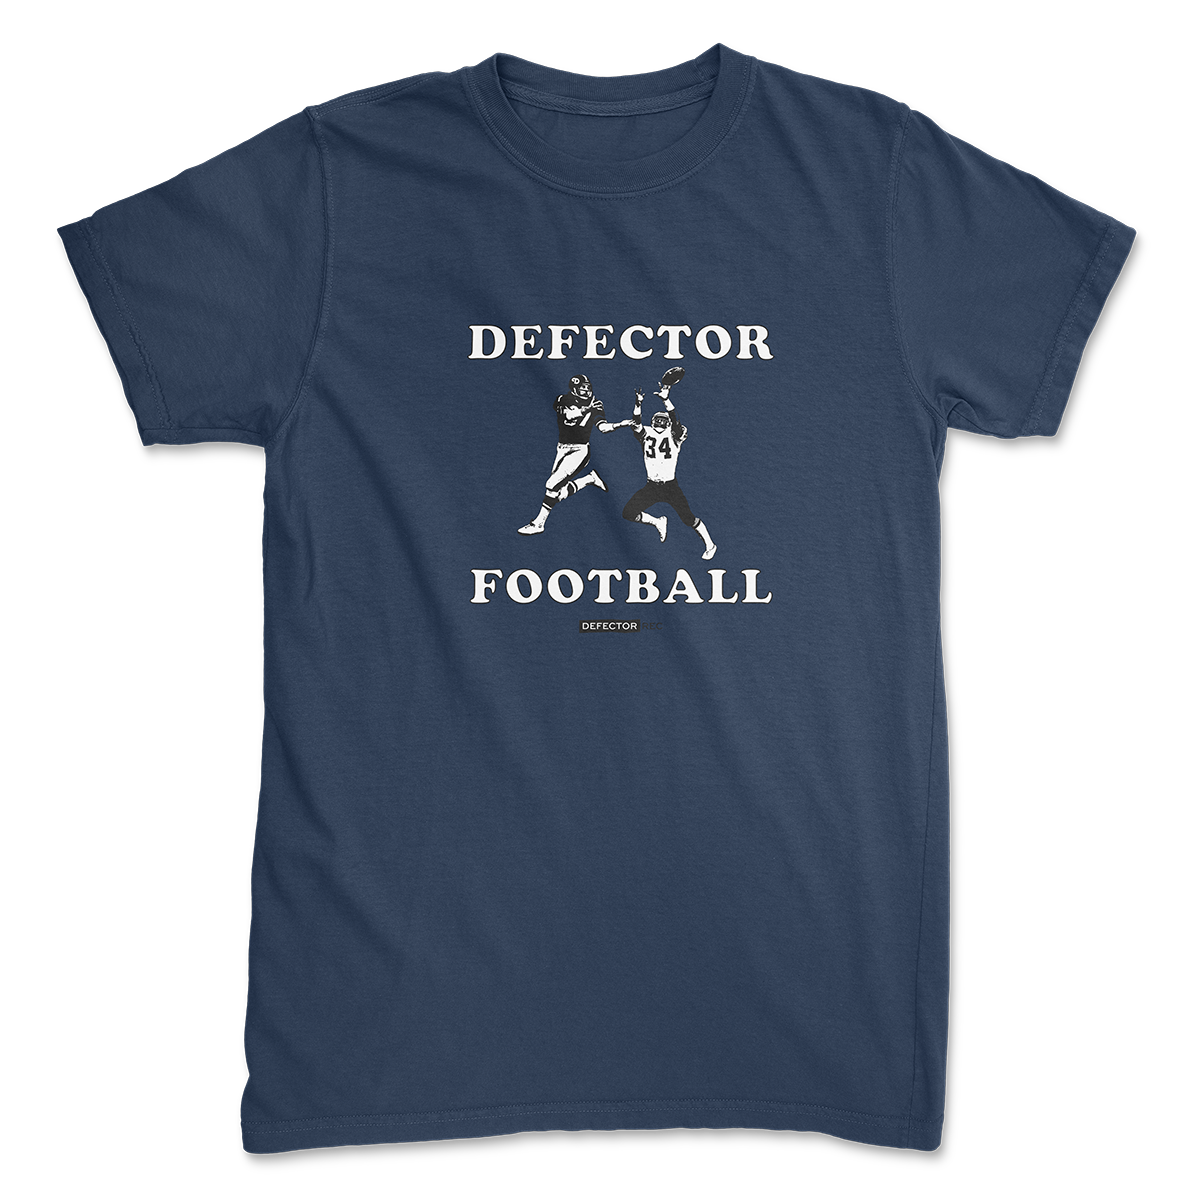 Defector shirt that says “DEFECTOR FOOTBALL.” Features clip art of American football players.  Navy shirt in ‘unisex’ cut.